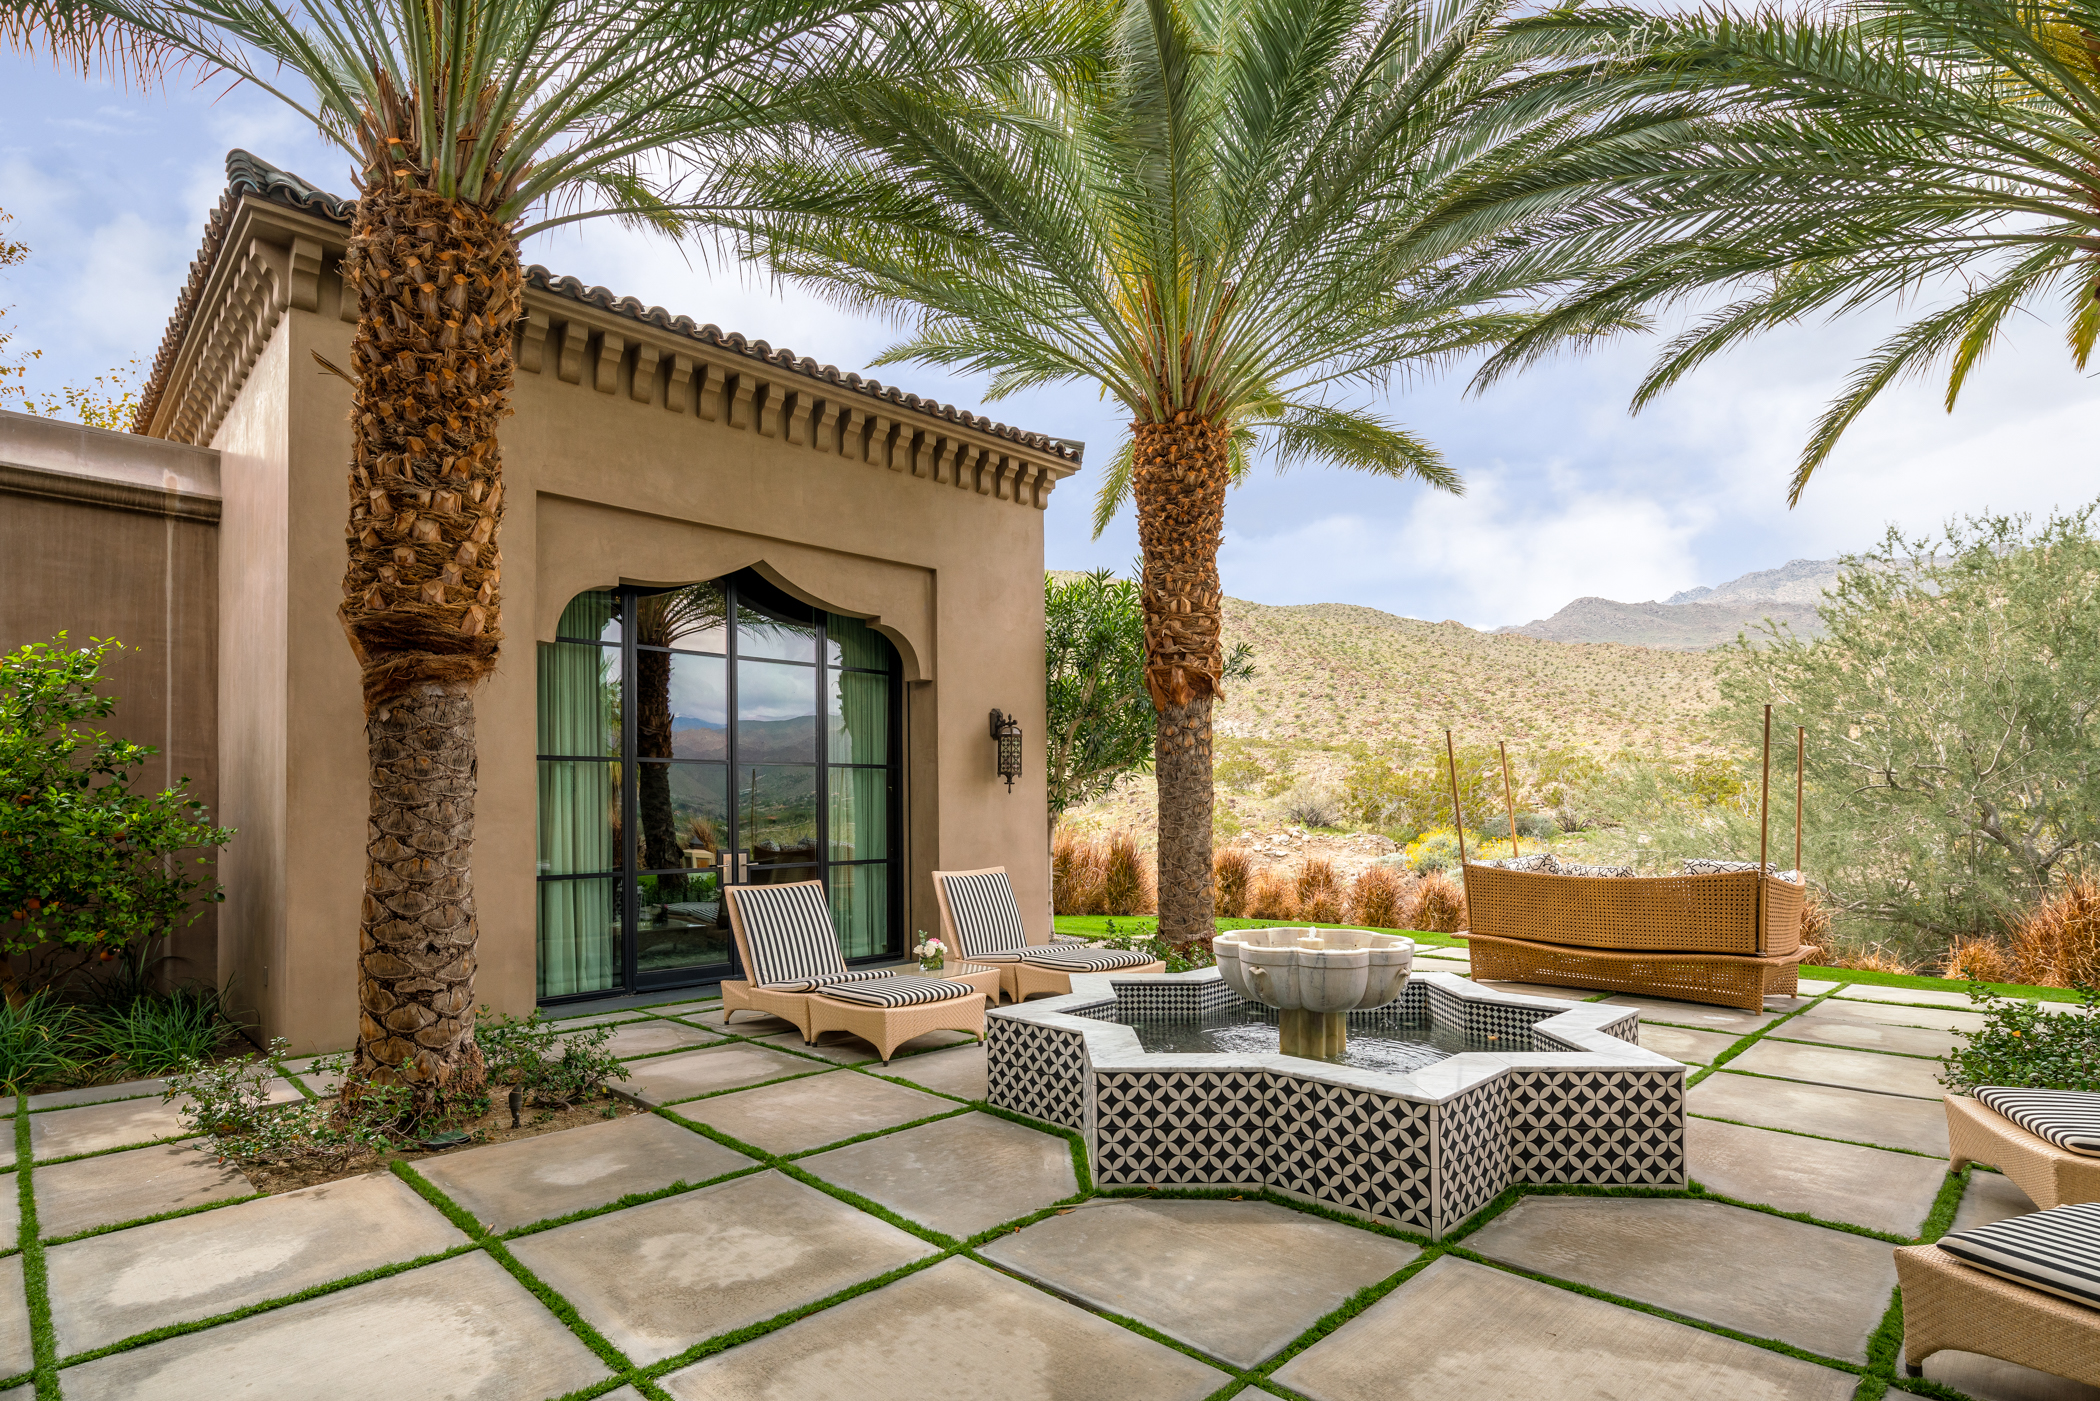 A Moroccan-inspired star fountain sits on a patio next to a boxy house in the desert. 